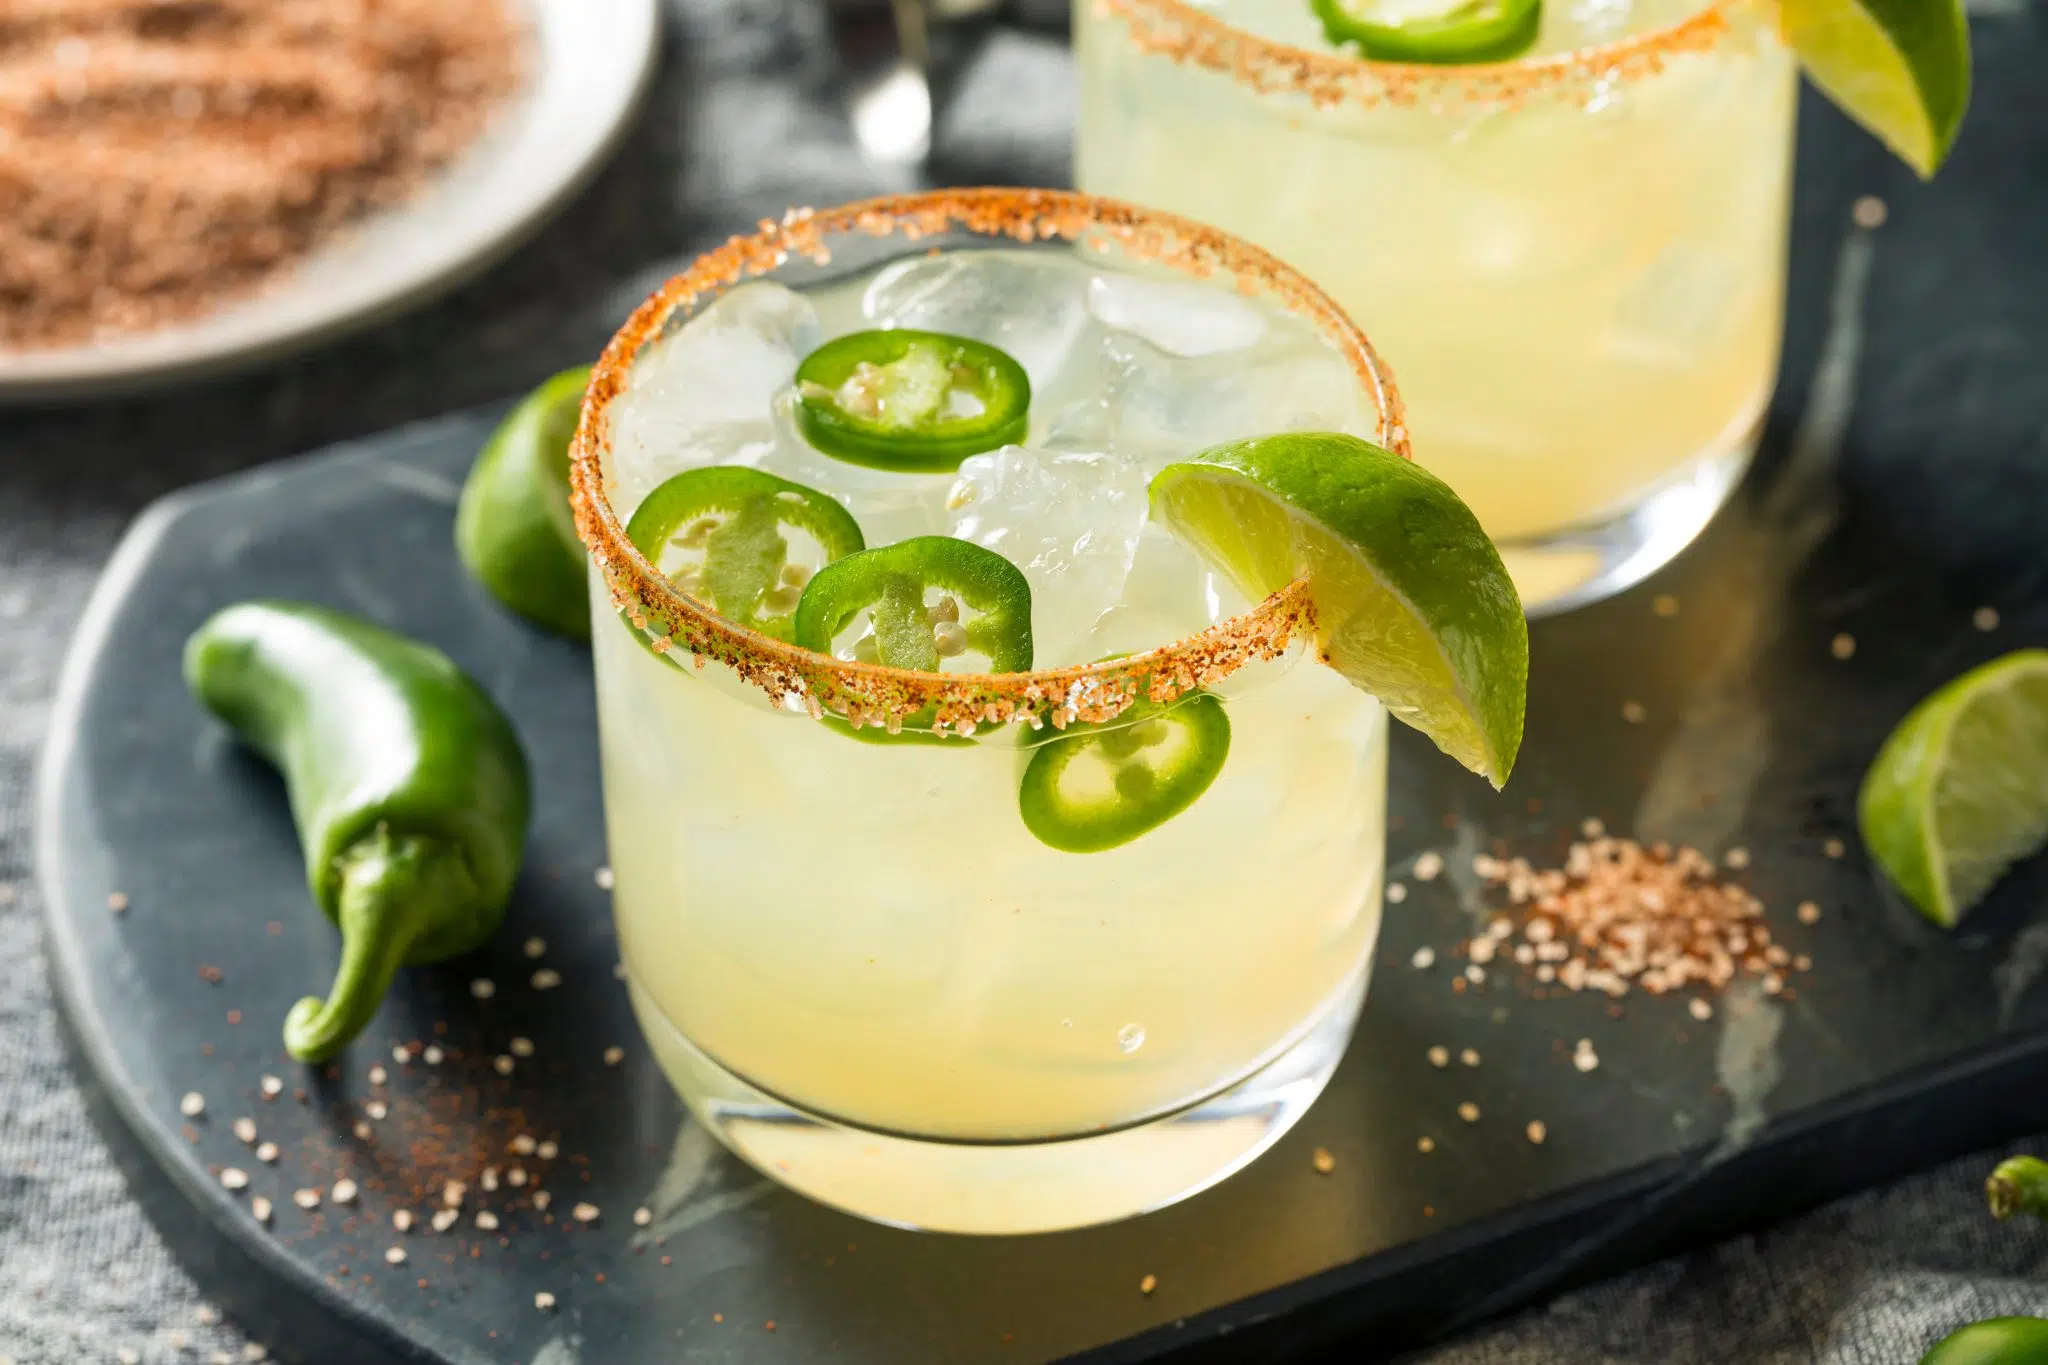 Two Spicy Margarita cocktails in low ball glasses on a black tray surrounded by a green chili pepper, a lime wedge, and red salt.